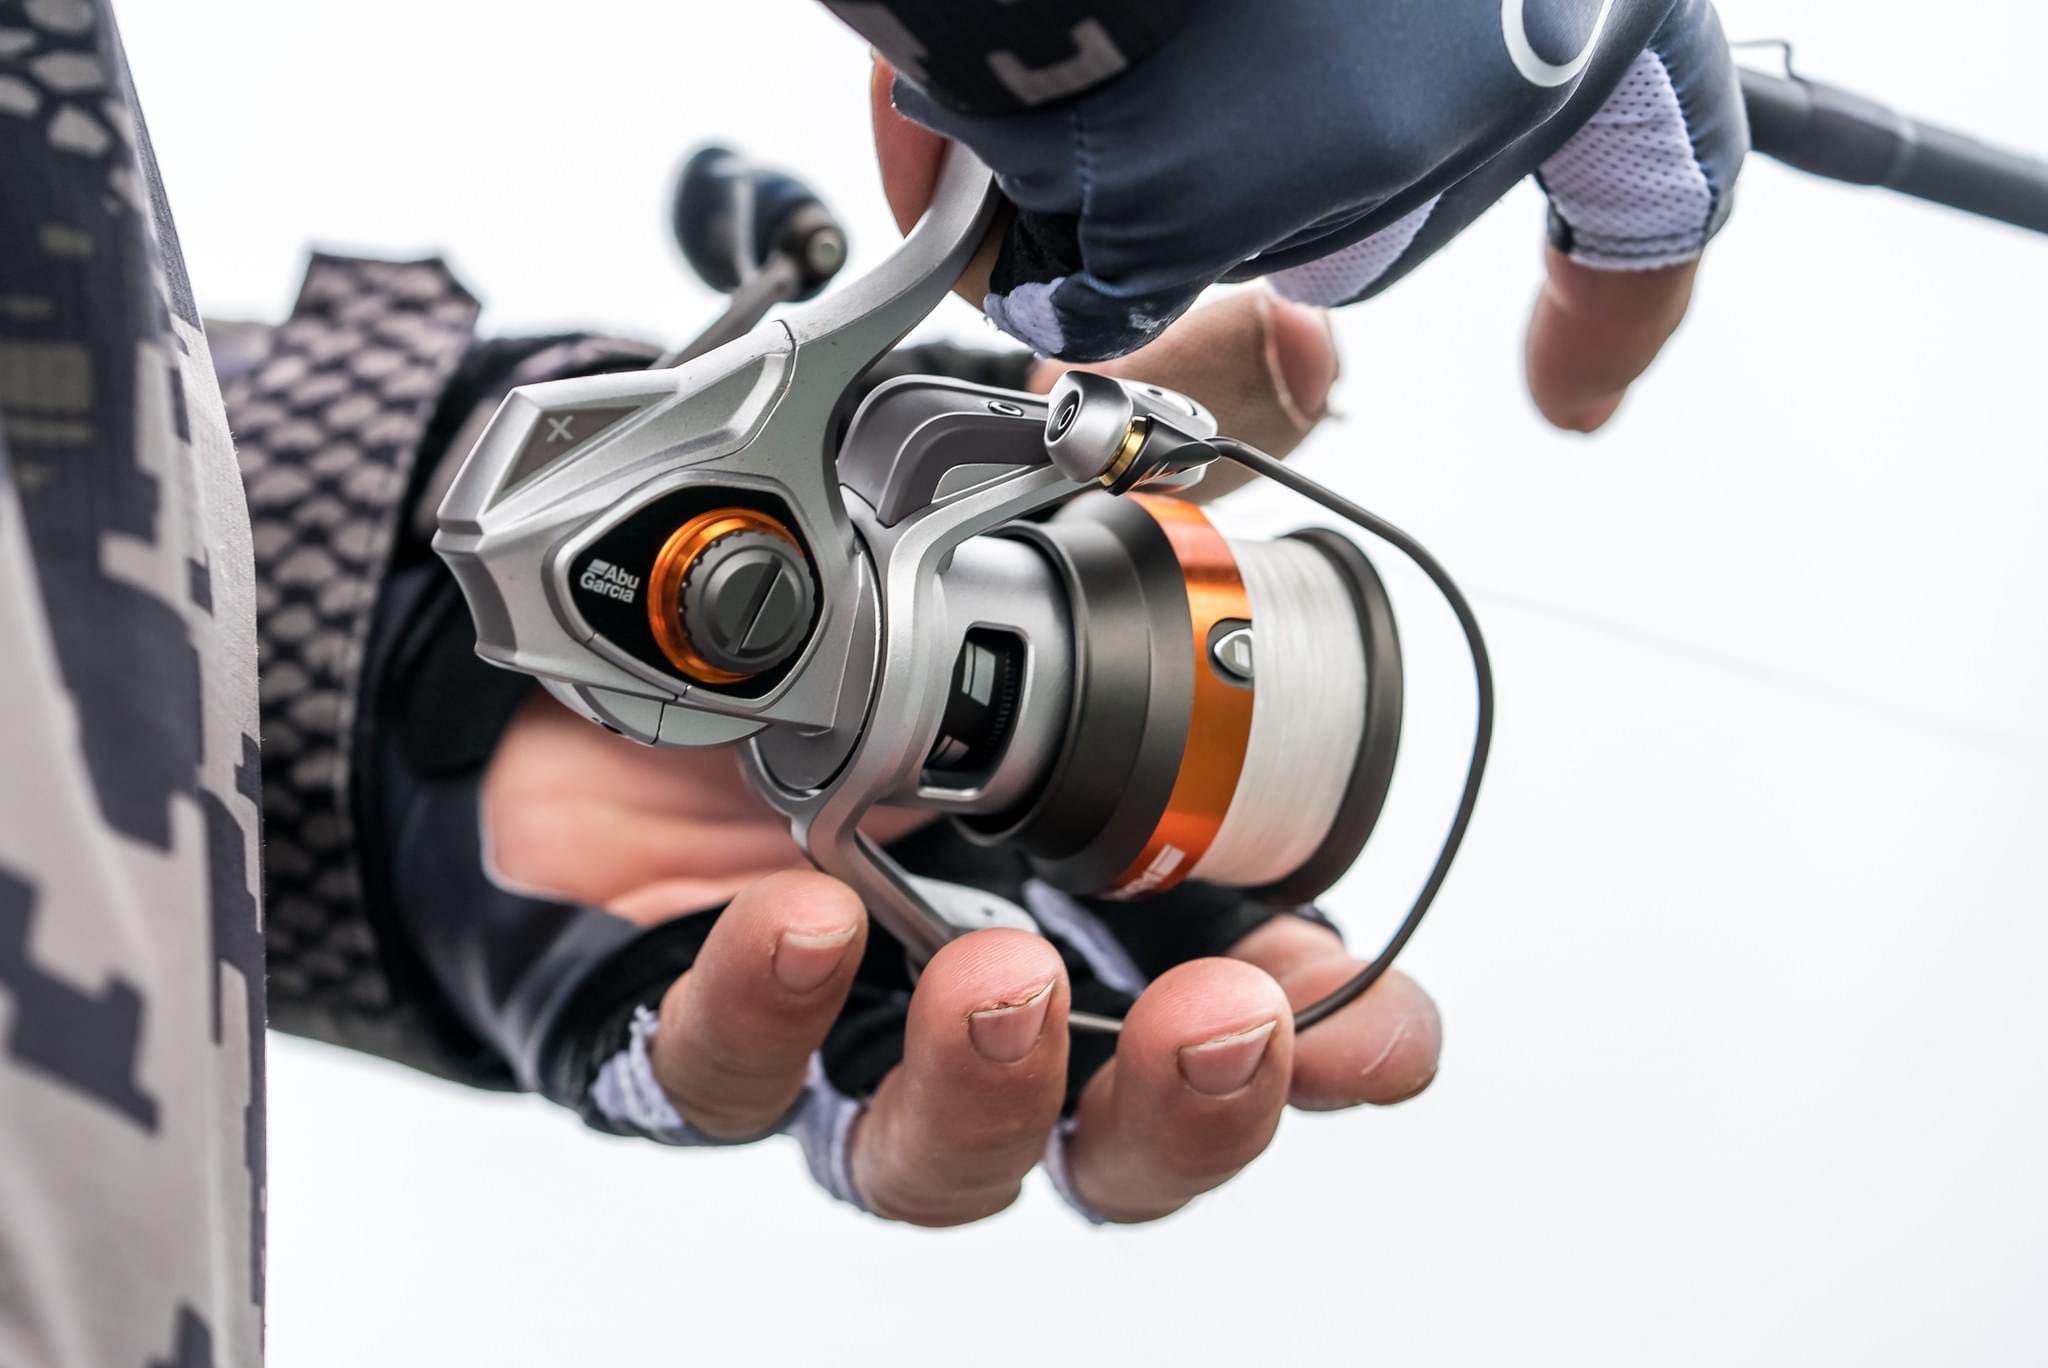 Abu Garcia on X: With an AM-G fully machined gear system, 6+1 super smooth  stainless steel bearings, and an asymmetrical design for optimized weight  and balance, the Revo X spinning reel is